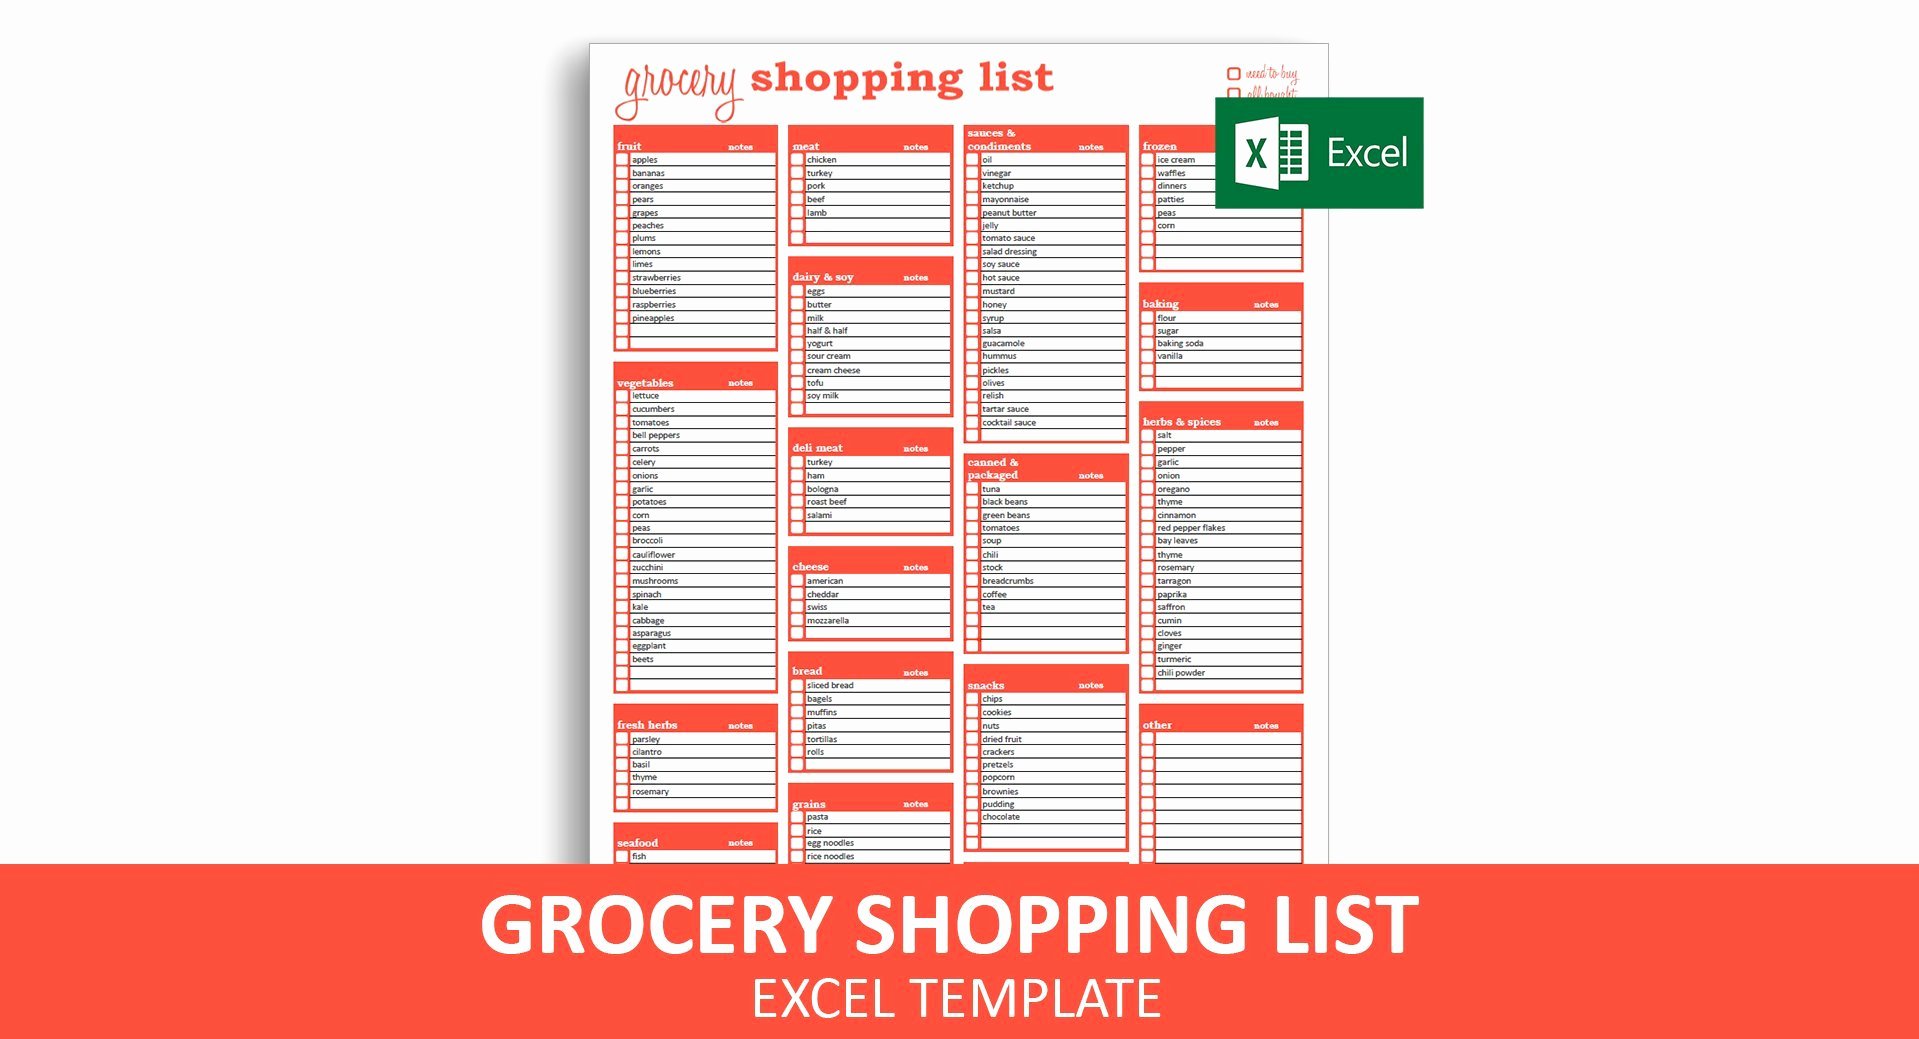 Shopping List Template Excel Fresh Grocery Shopping List Excel Template – Savvy Spreadsheets